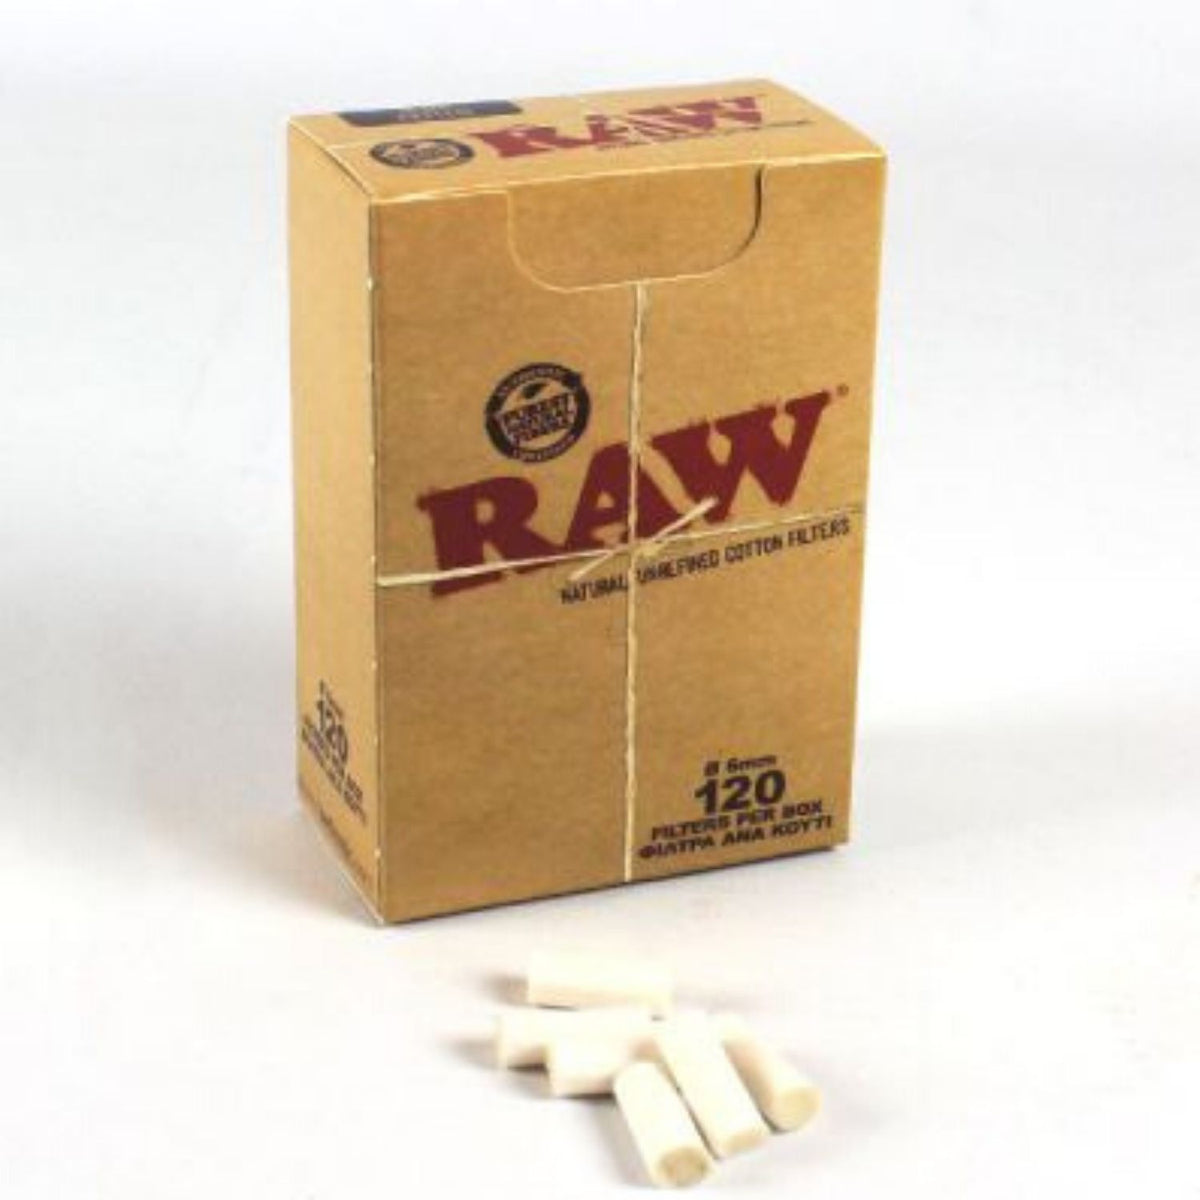 RAW Cotton Filter Tips Box - 120 Filter Tips